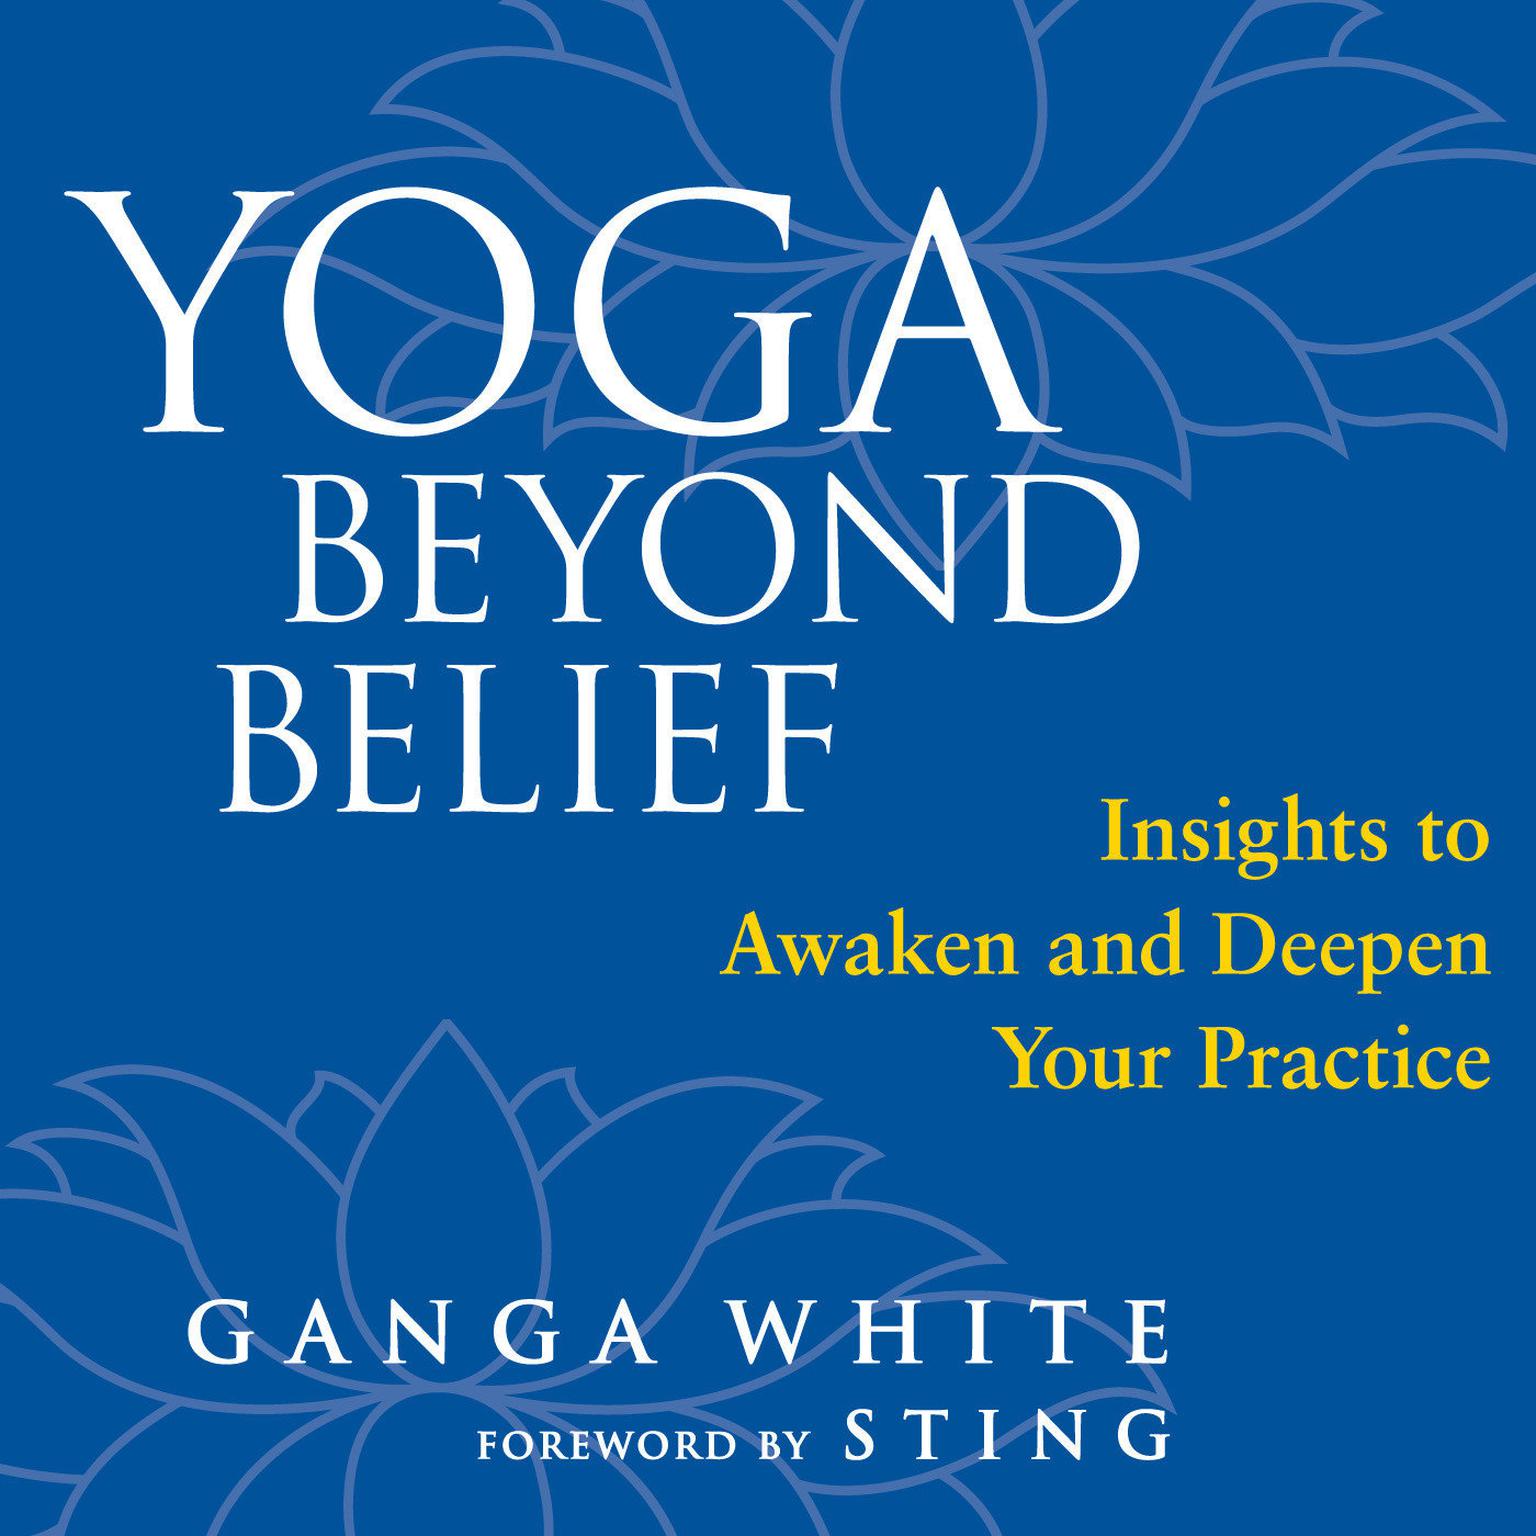 Yoga Beyond Belief: Insights to Awaken and Deepen Your Practice Audiobook, by Ganga White